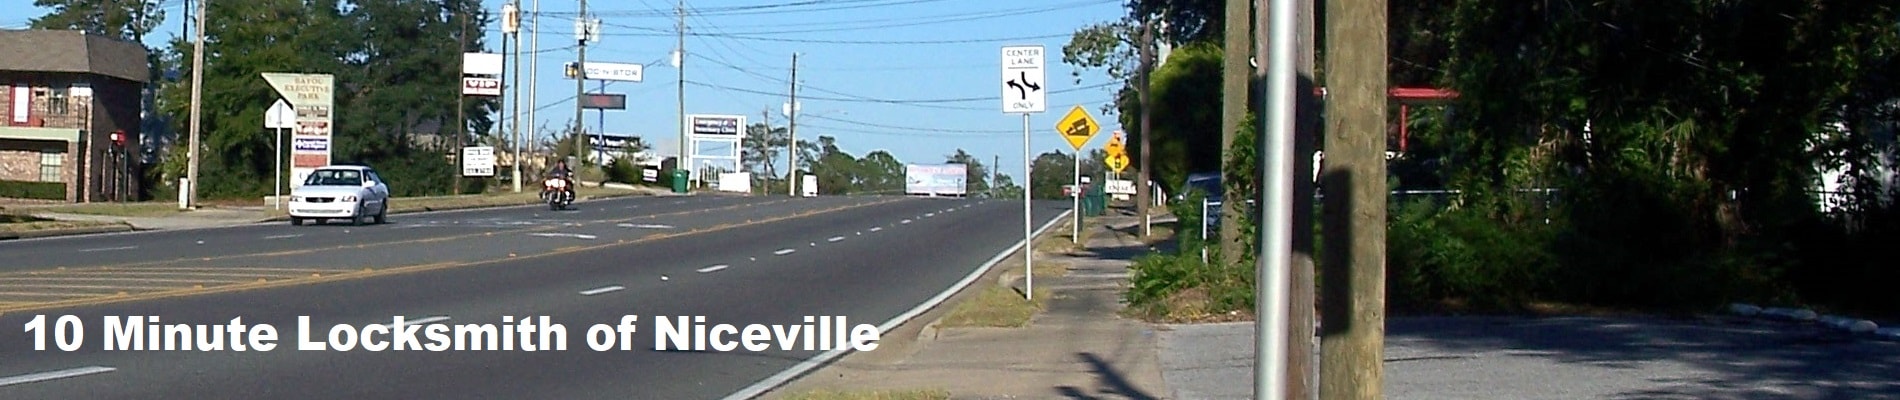 Niceville is a city in Okaloosa County, Florida